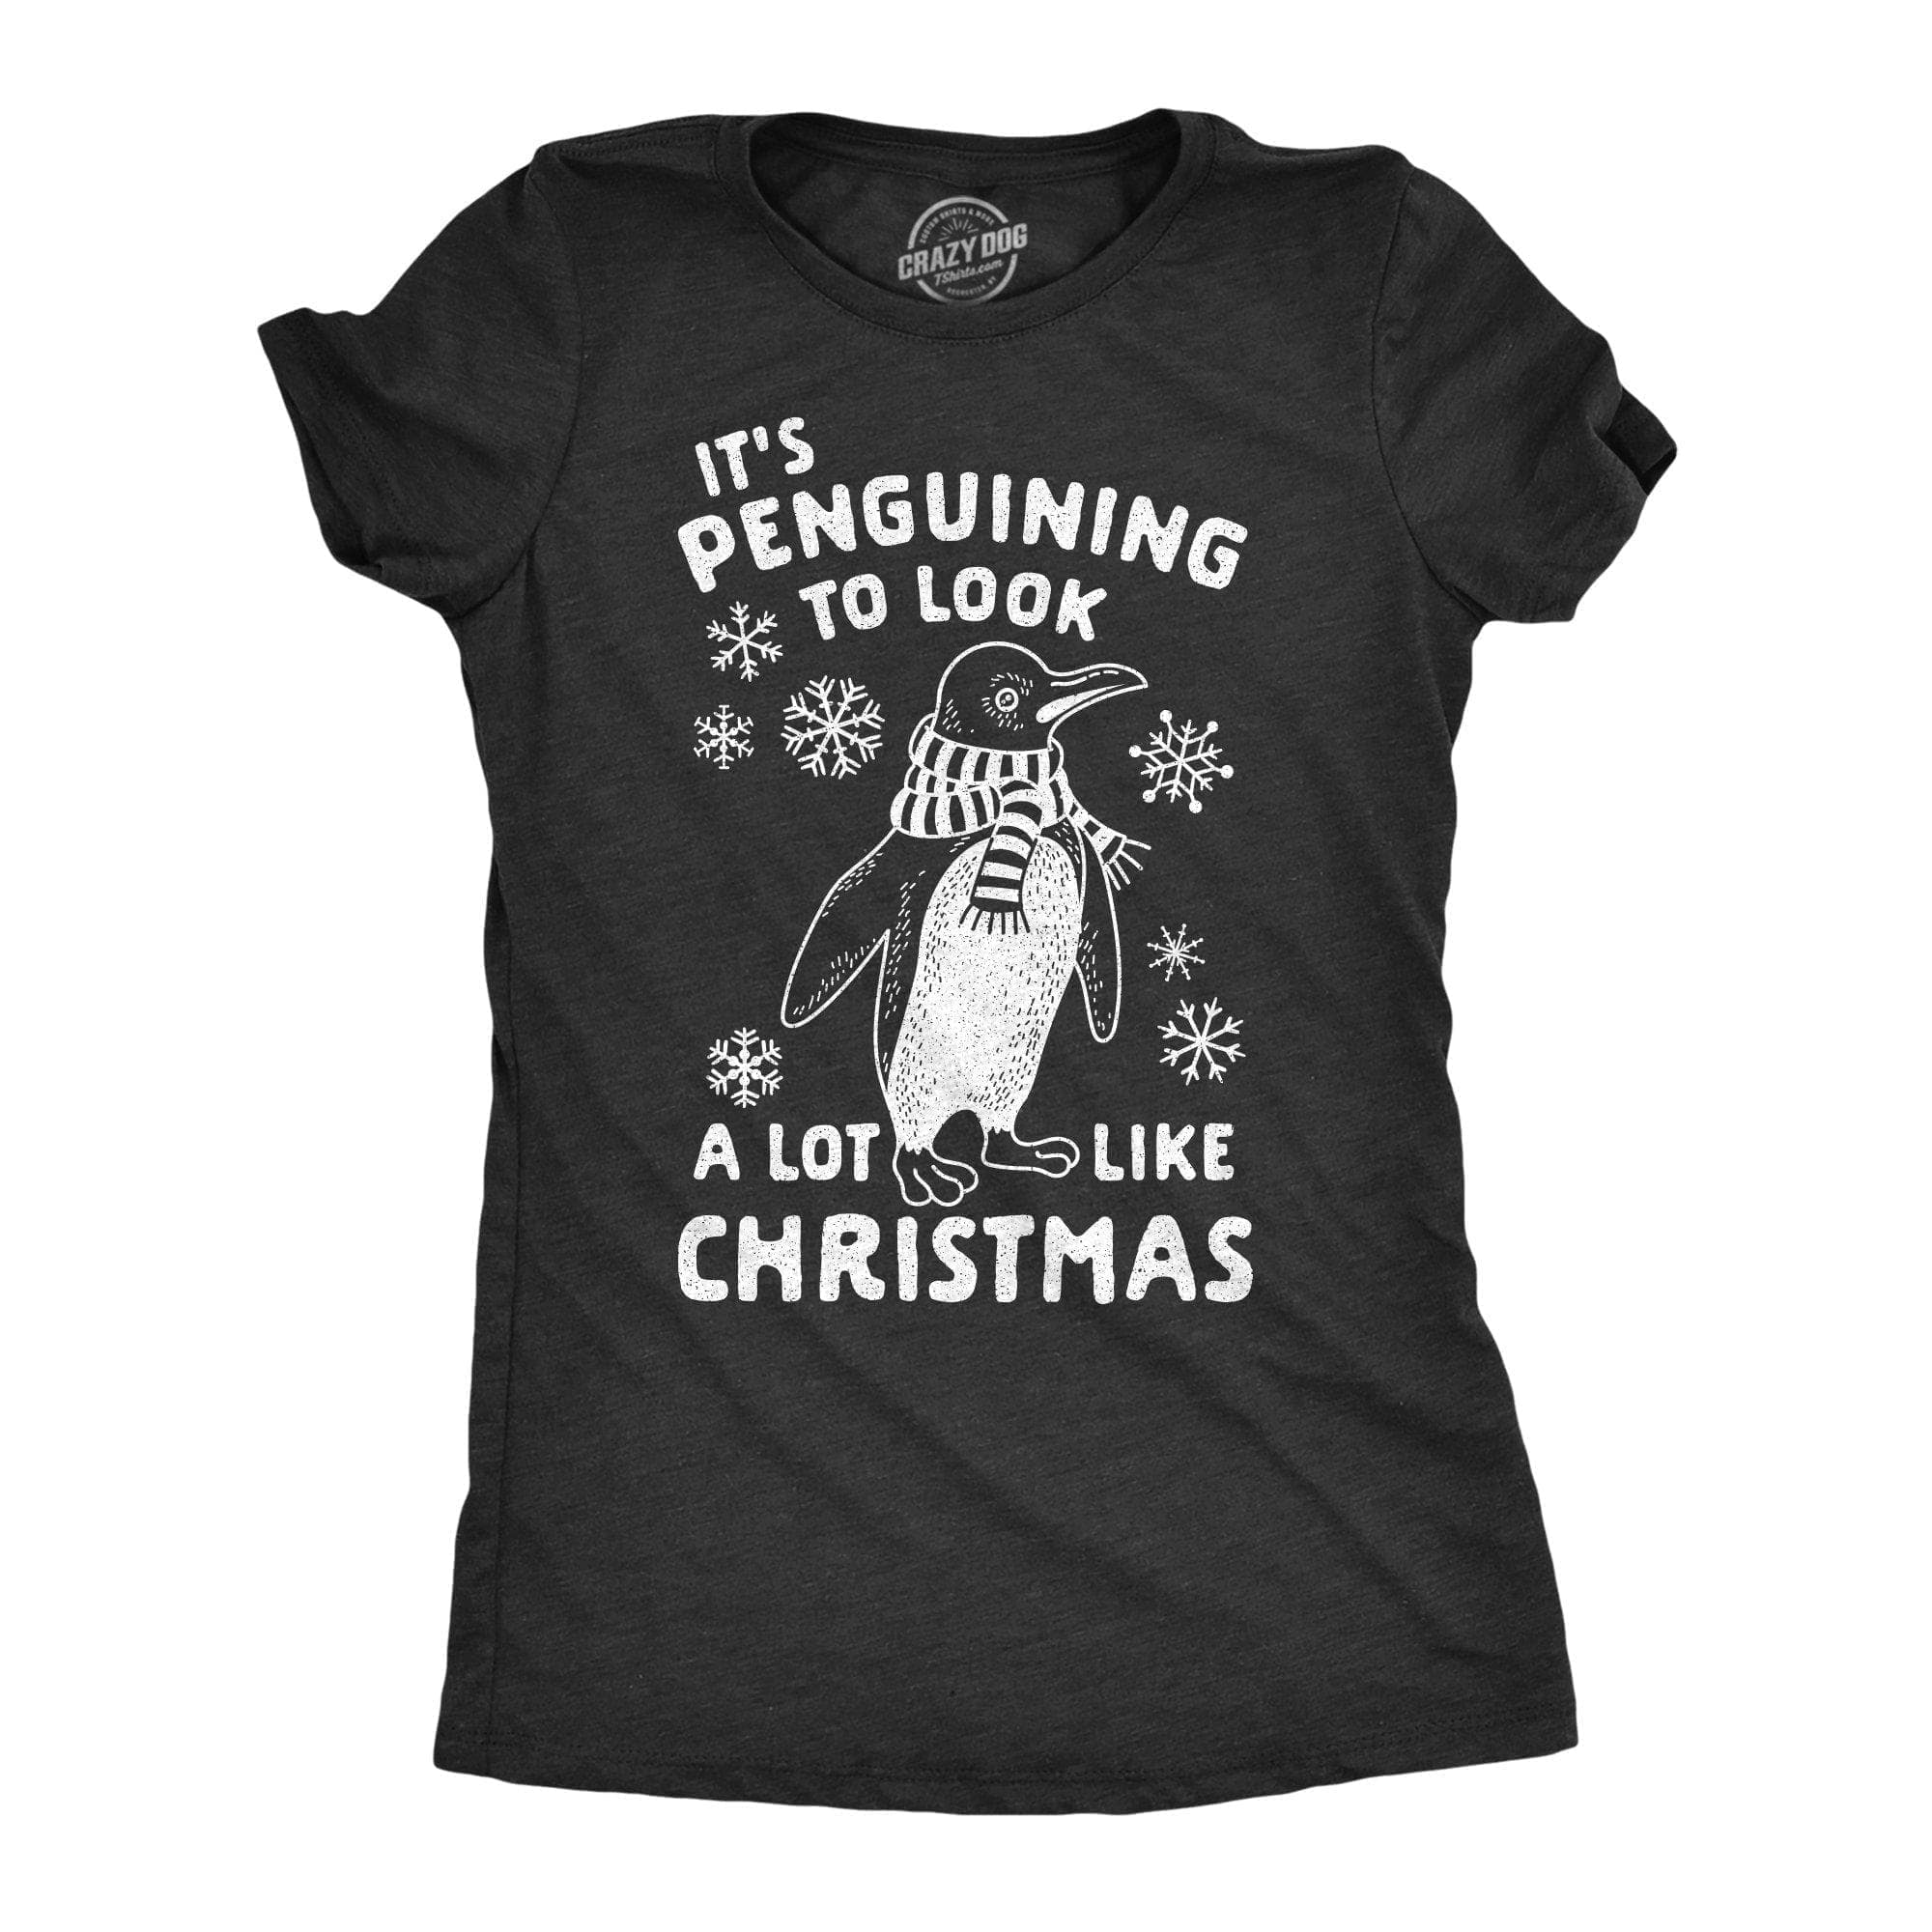 It's Penguining To Look A Lot Like Christmas Women's Tshirt - Crazy Dog T-Shirts